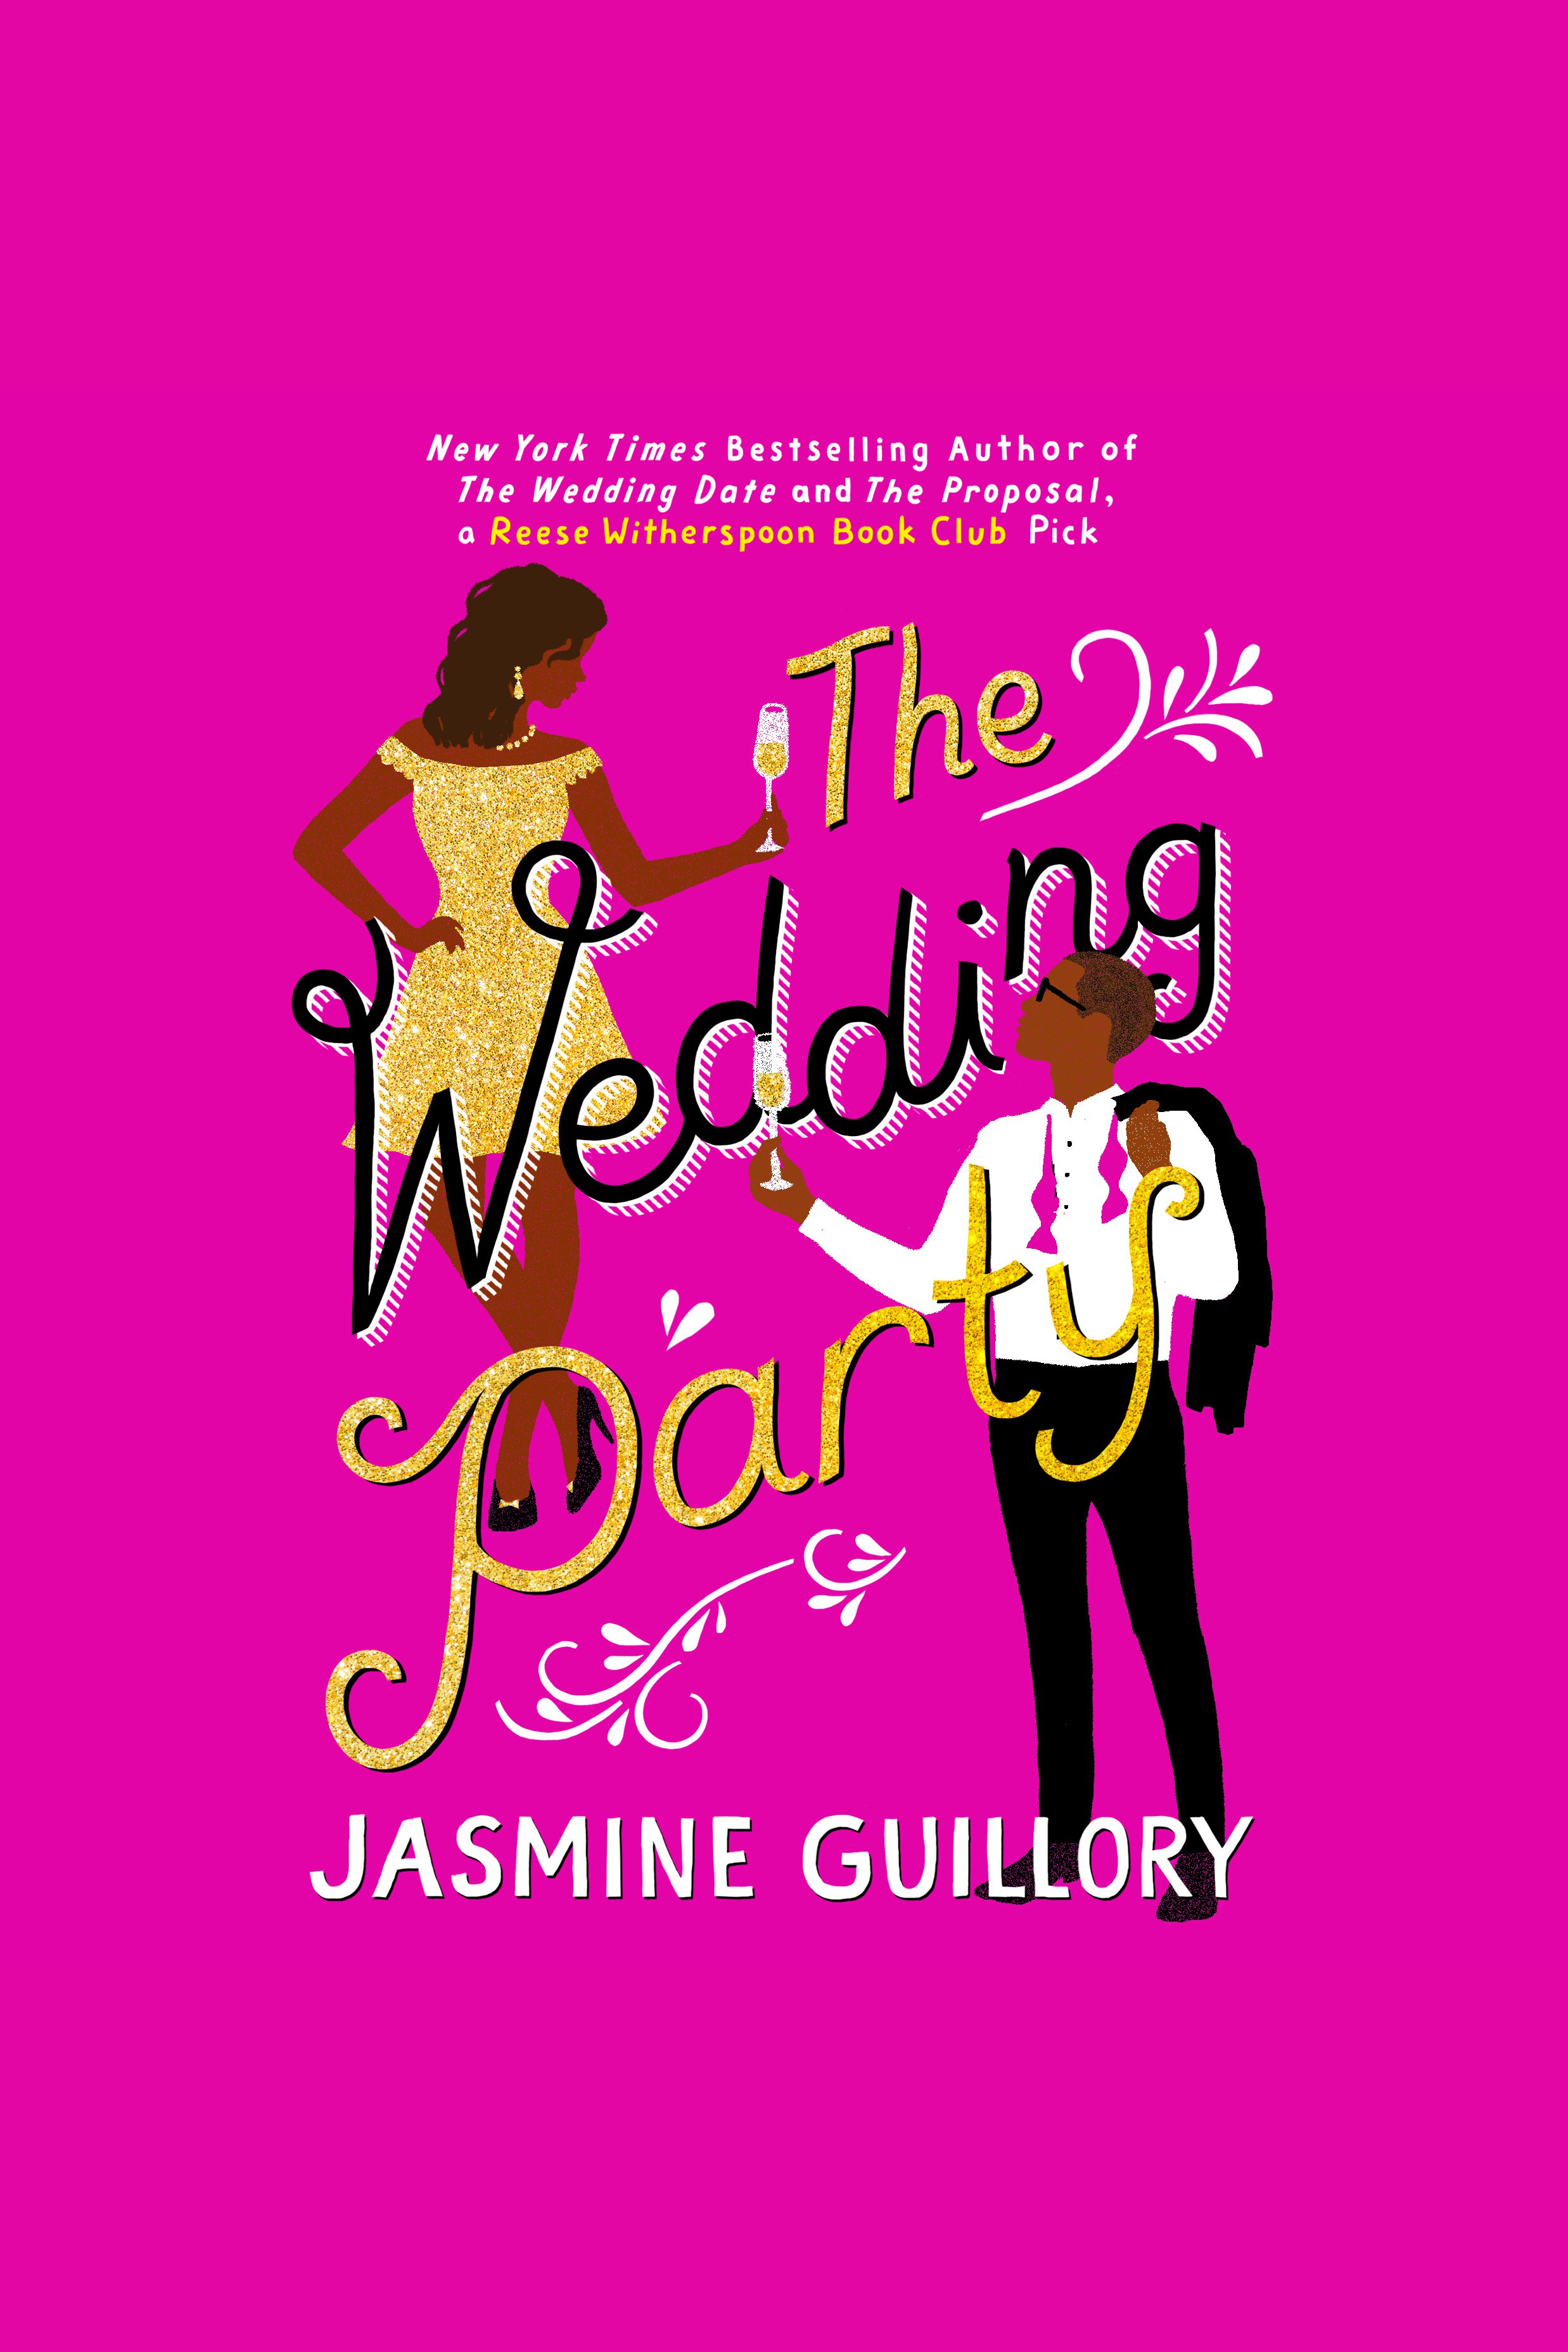 The wedding party cover image